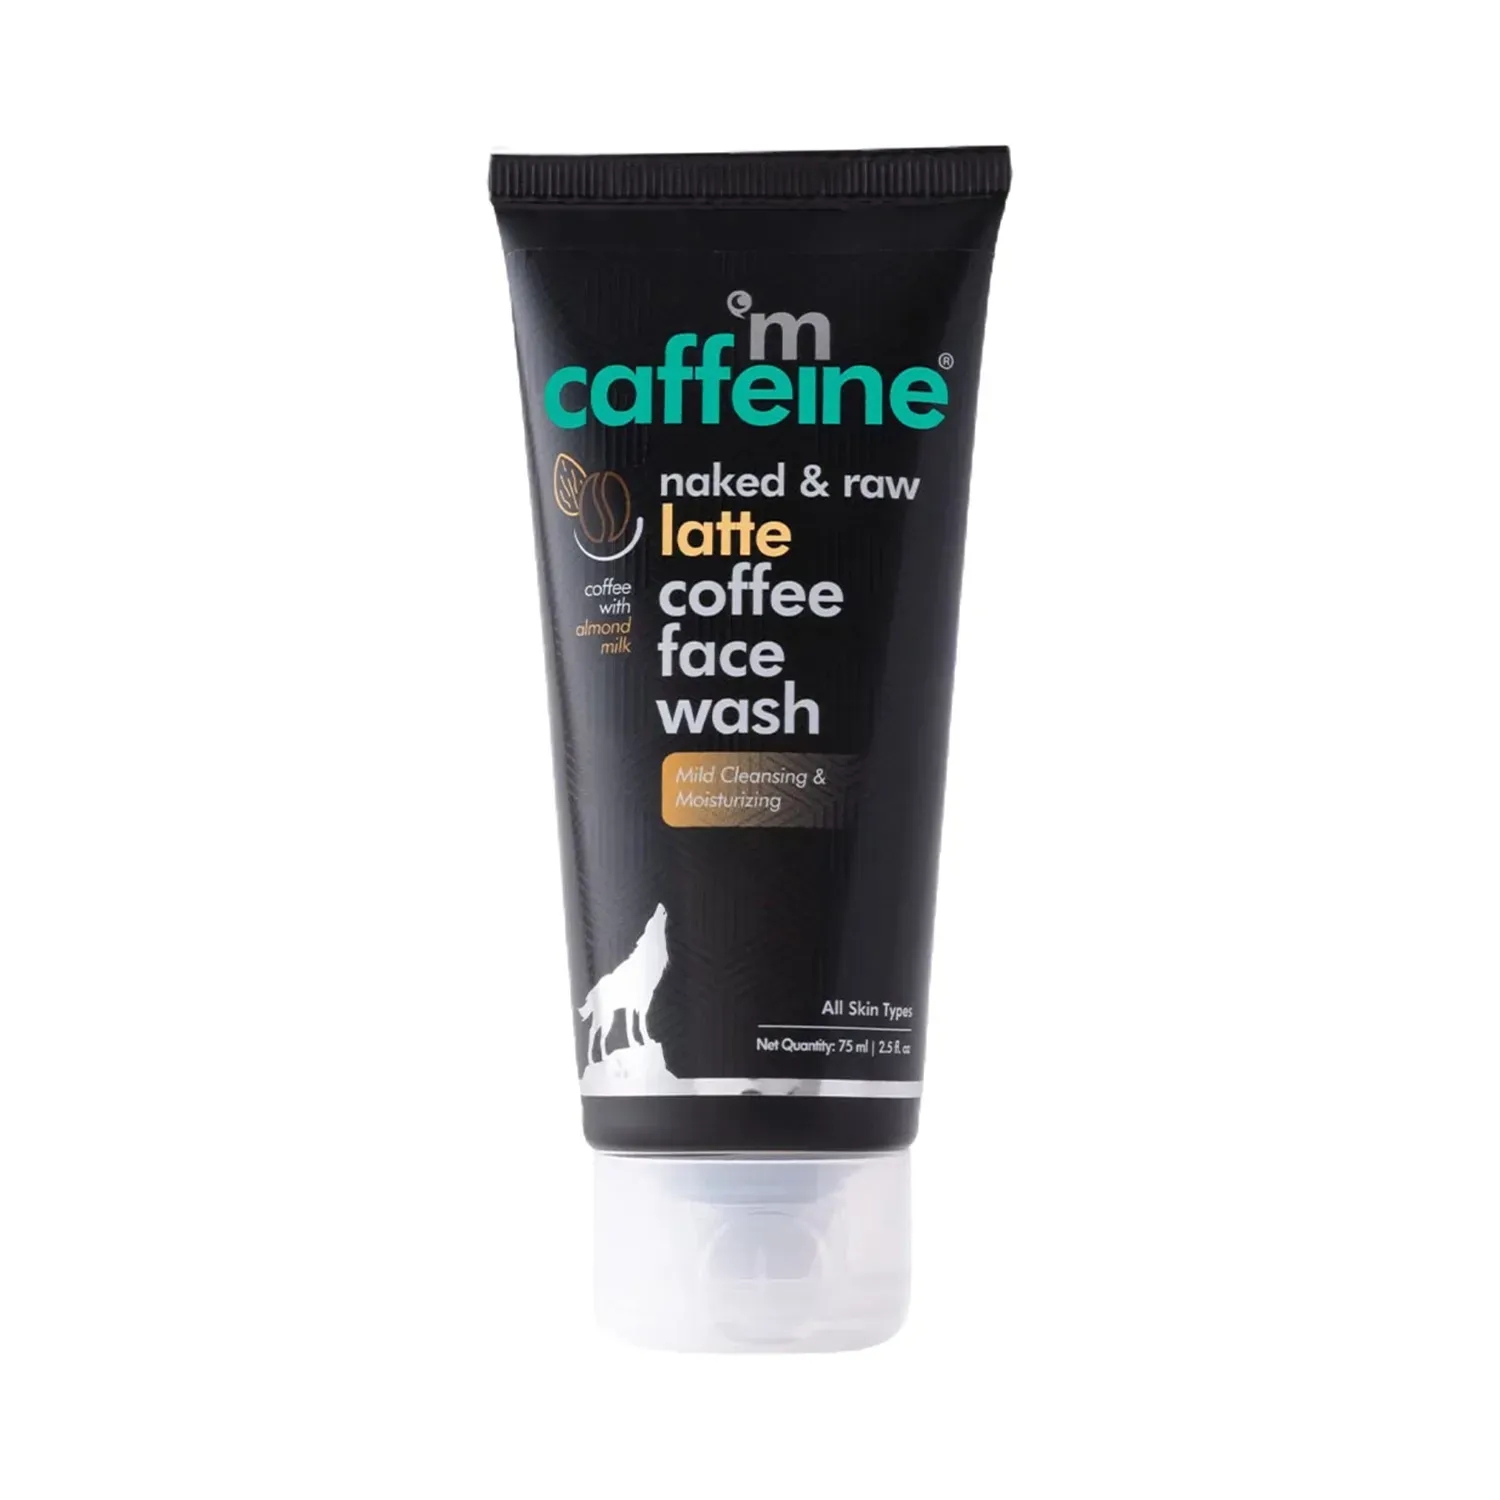 mCaffeine | mCaffeine Naked & Raw Latte Coffee Face Wash for Mild Cleansing with Almond Milk & Shea Butter - (75ml)